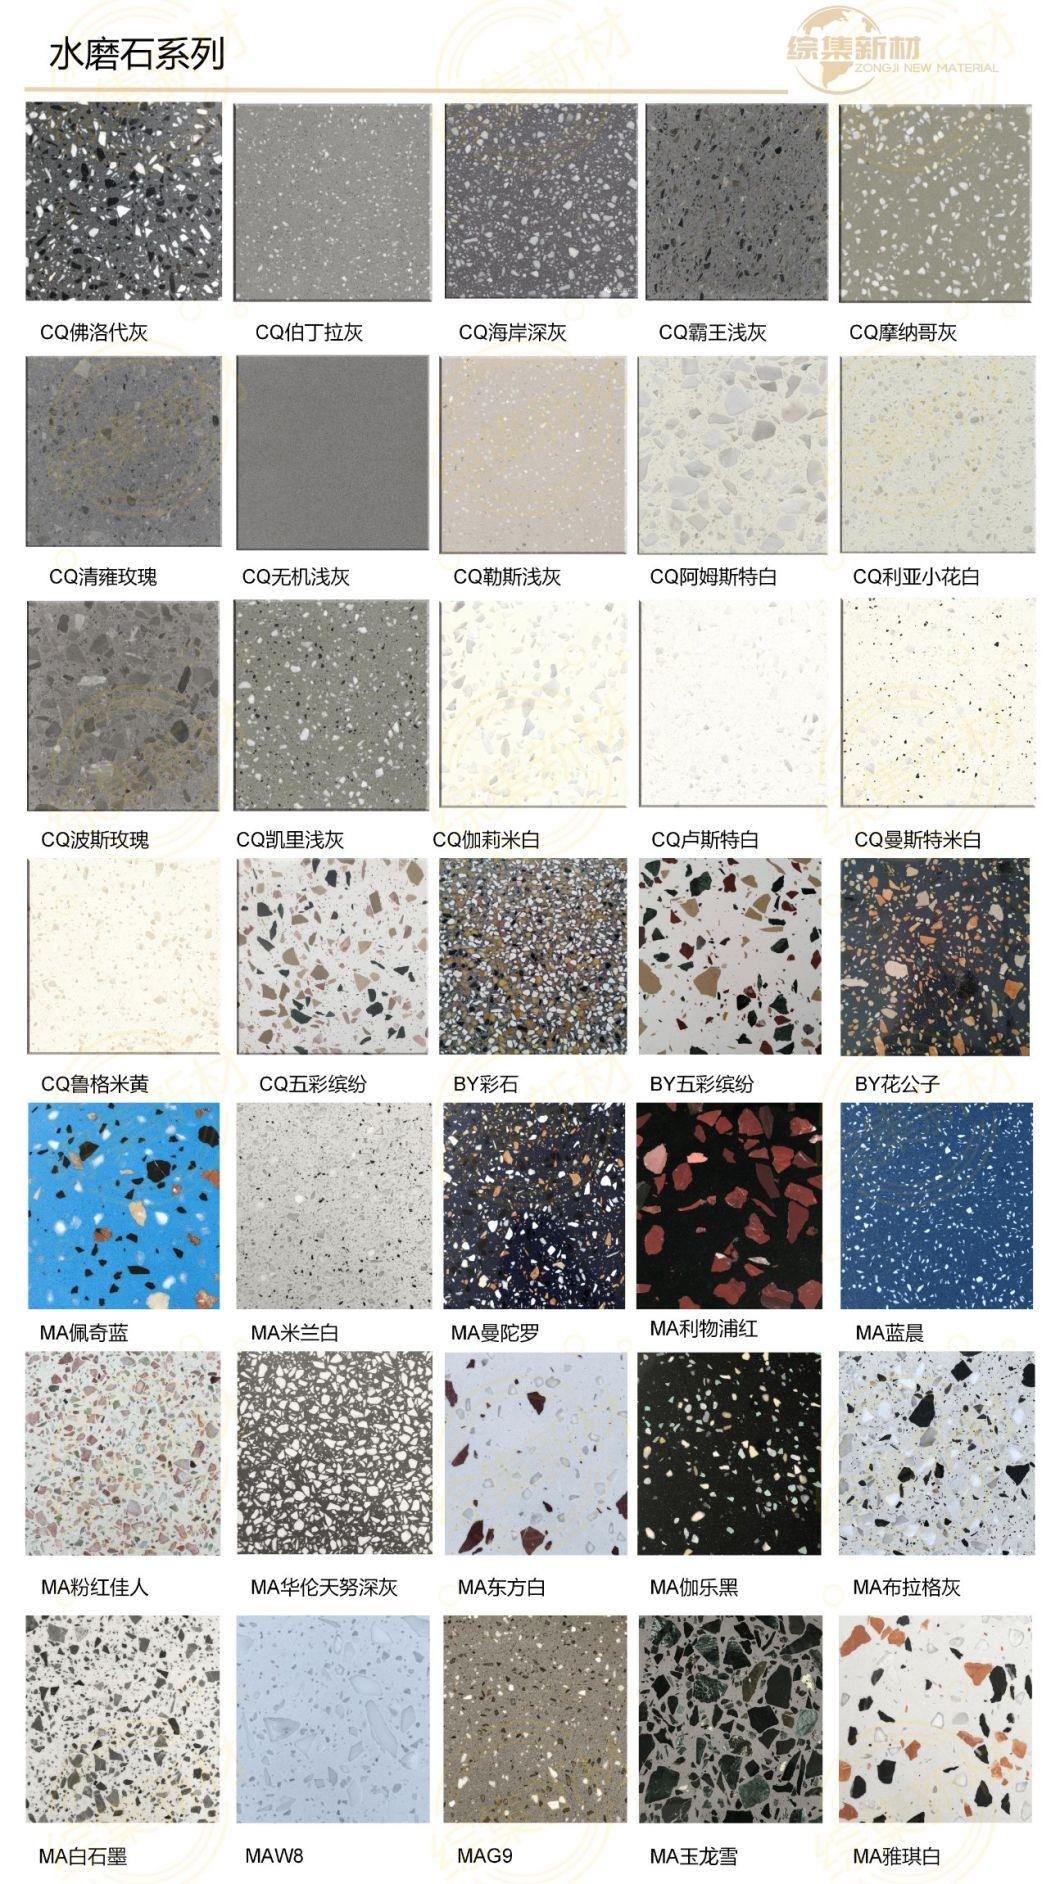 Chinese Factory Cement Stone Special Polishing Terrazzo for Floor Tiles Bathroom